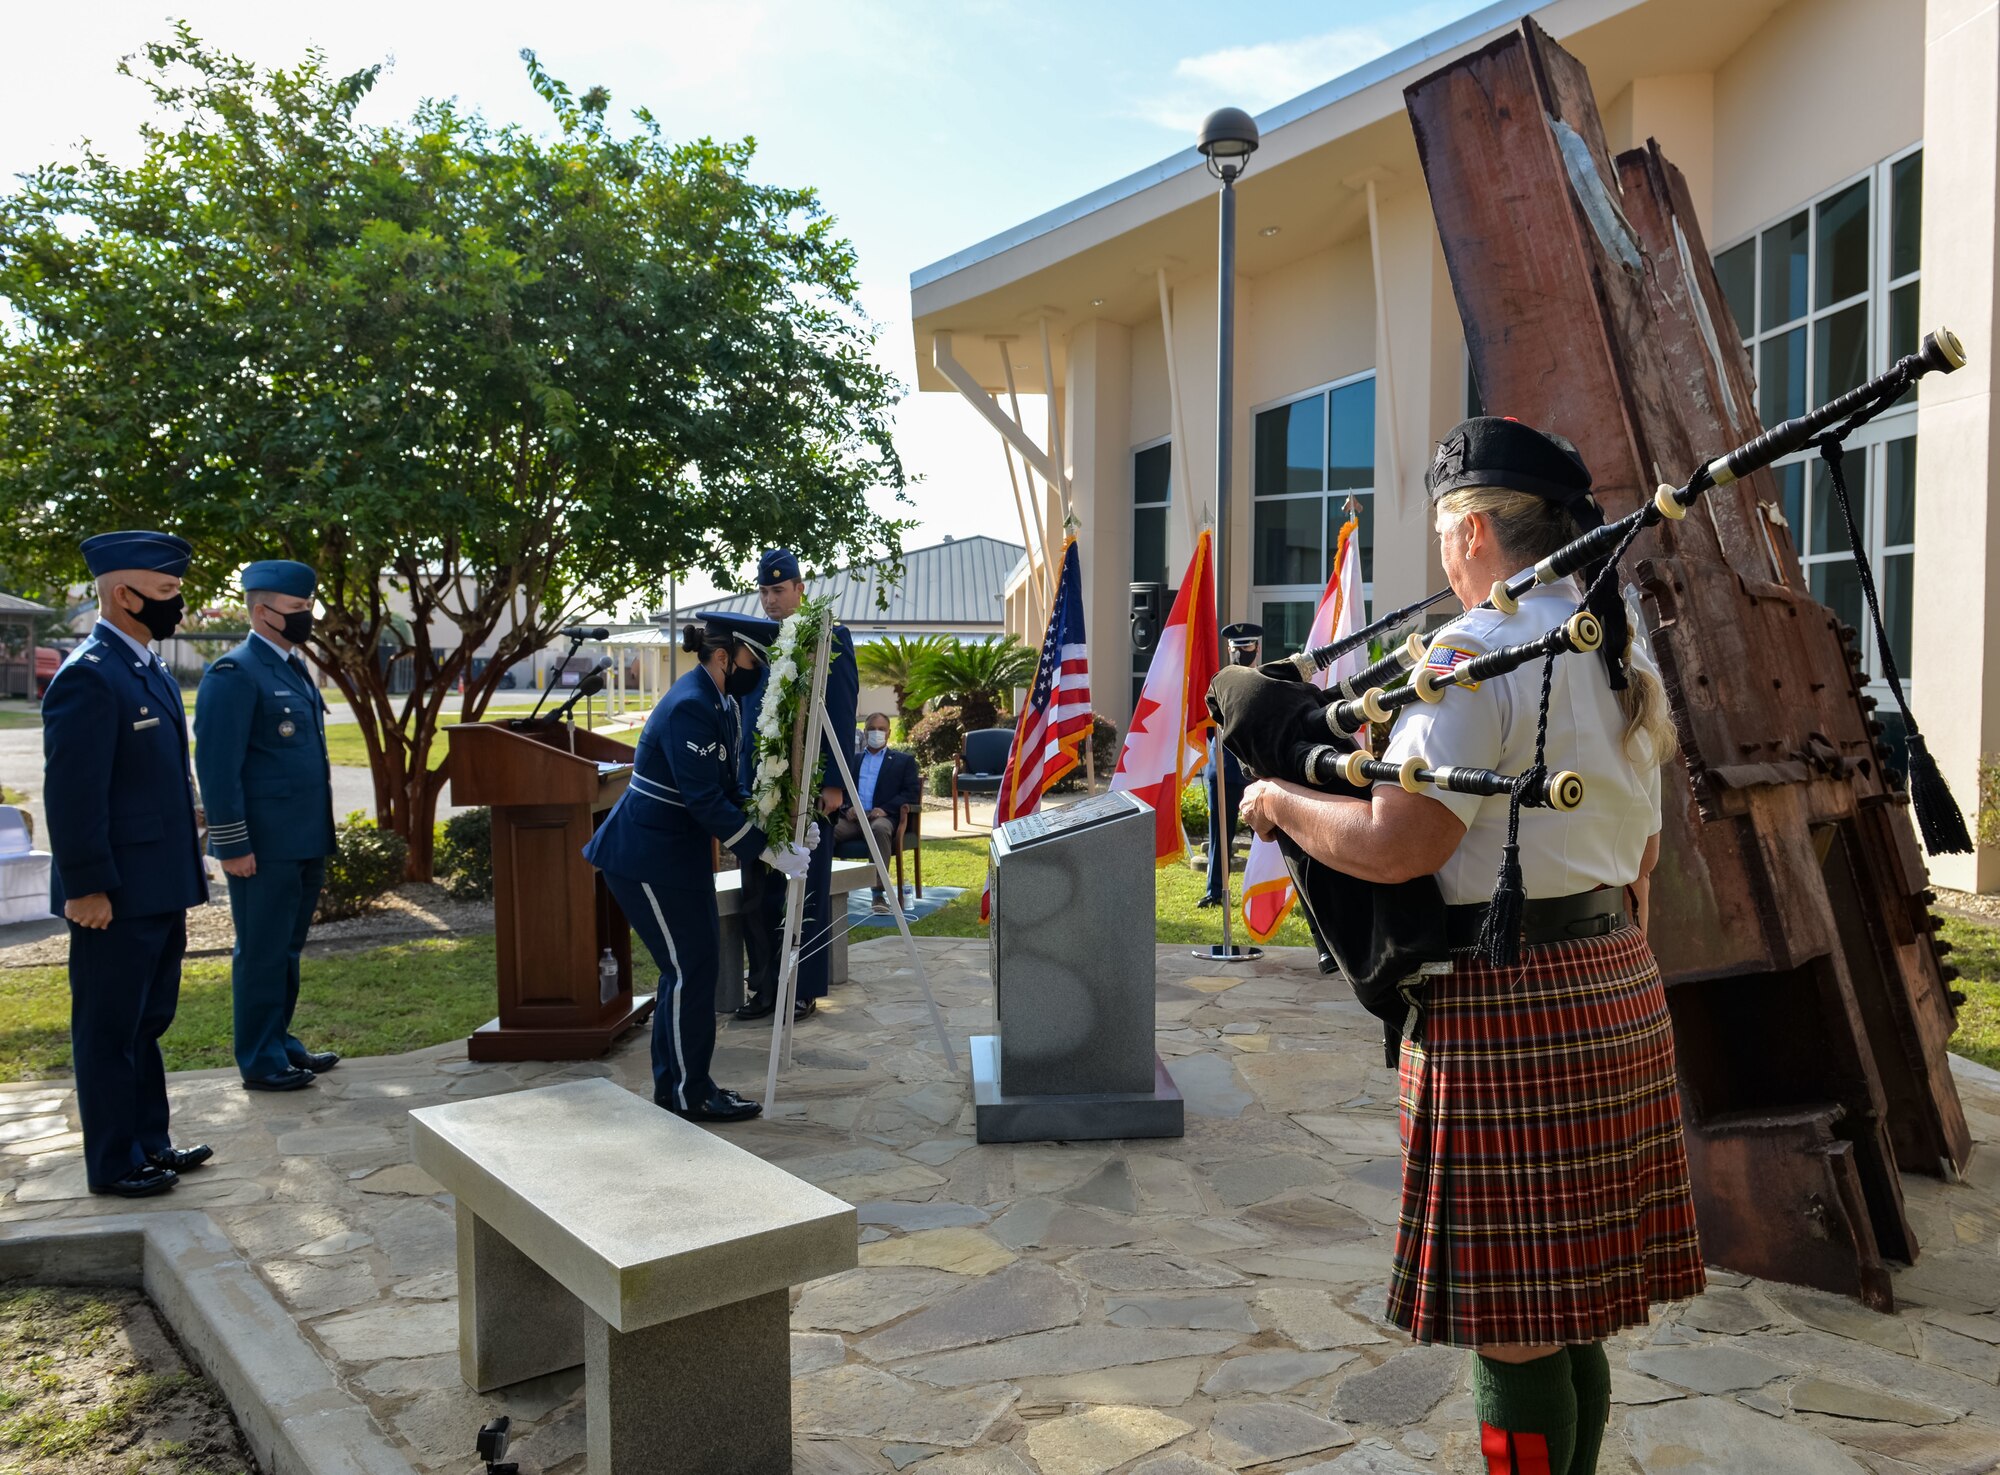 U.S. Air Force Airman 1st Class Kim Tate placed a wreath at the 601st Air Operations Center 9/11 memorial, September 10, 2021, Tyndall Air Force Base, Fla. The 601st AOC held a ceremony to honor the memory of those who lost their lives as a result of the tragic events of September 11, 2001 (Air National Guard photo by, Master Sgt. Regina Young)